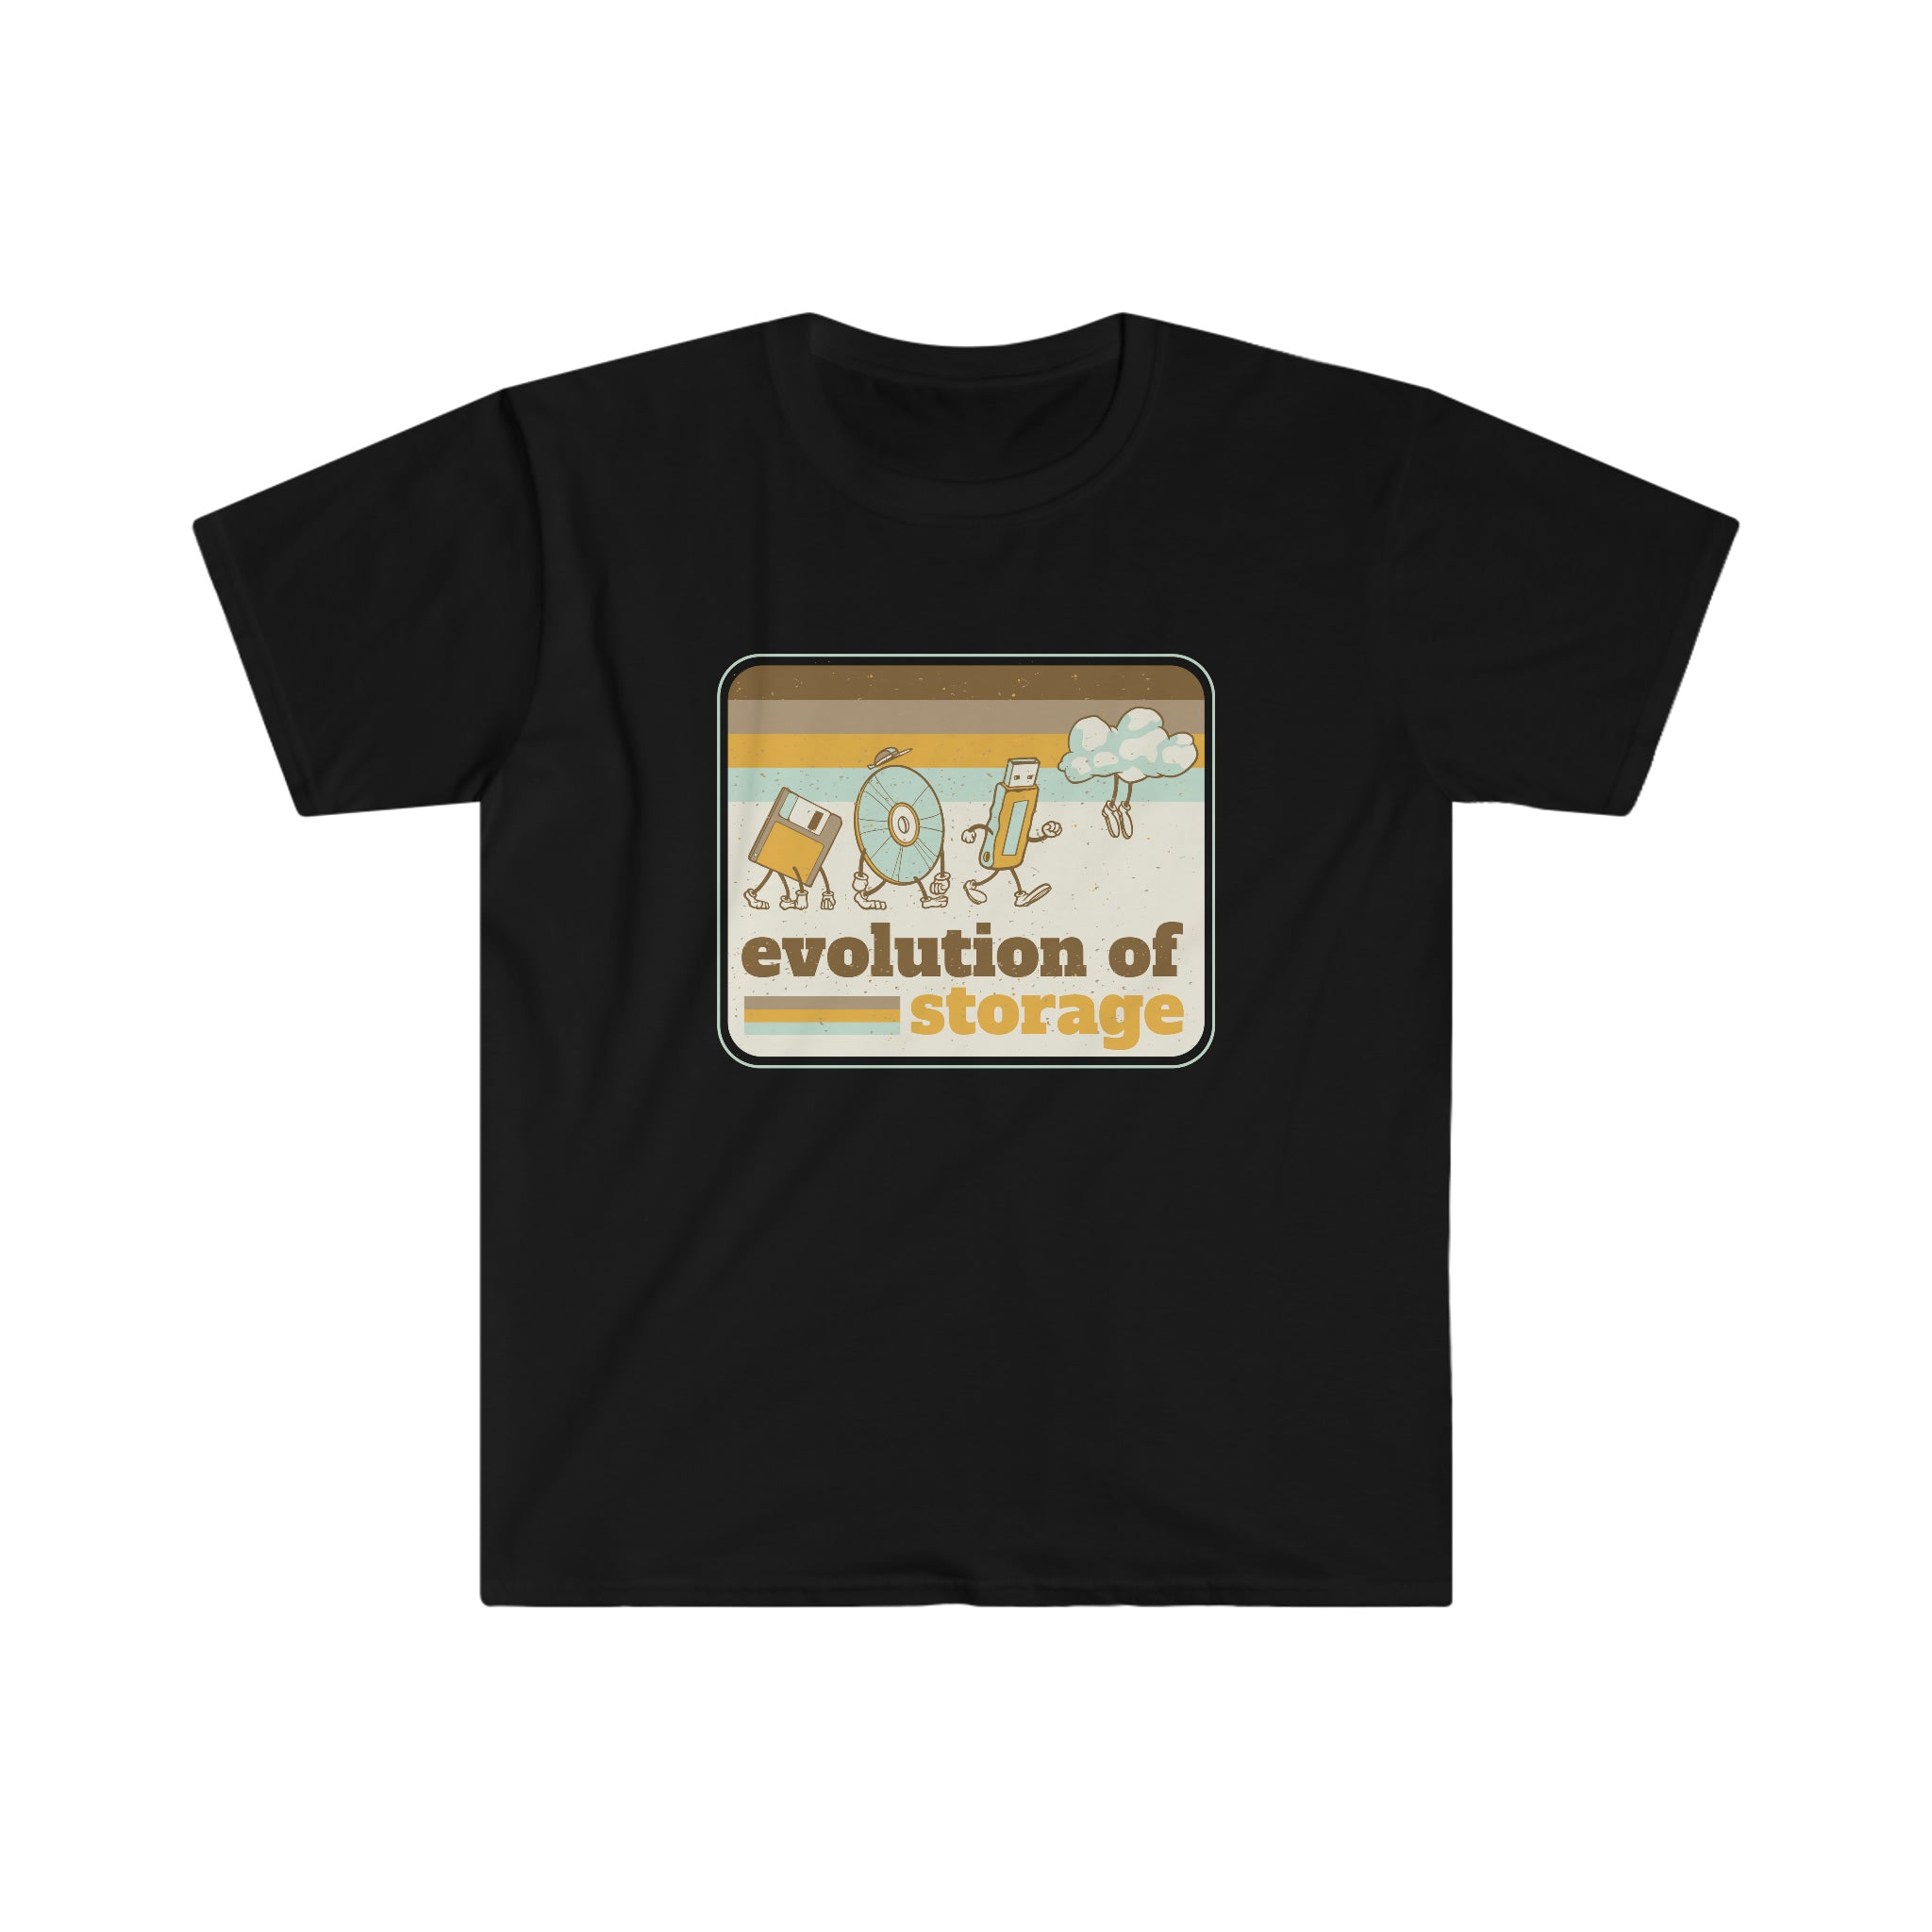 A Evolution of Storage T-Shirt with a graphic depicting the "evolution of storage technology," showing icons of a floppy disk, a cd, a usb flash drive, and cloud computing.